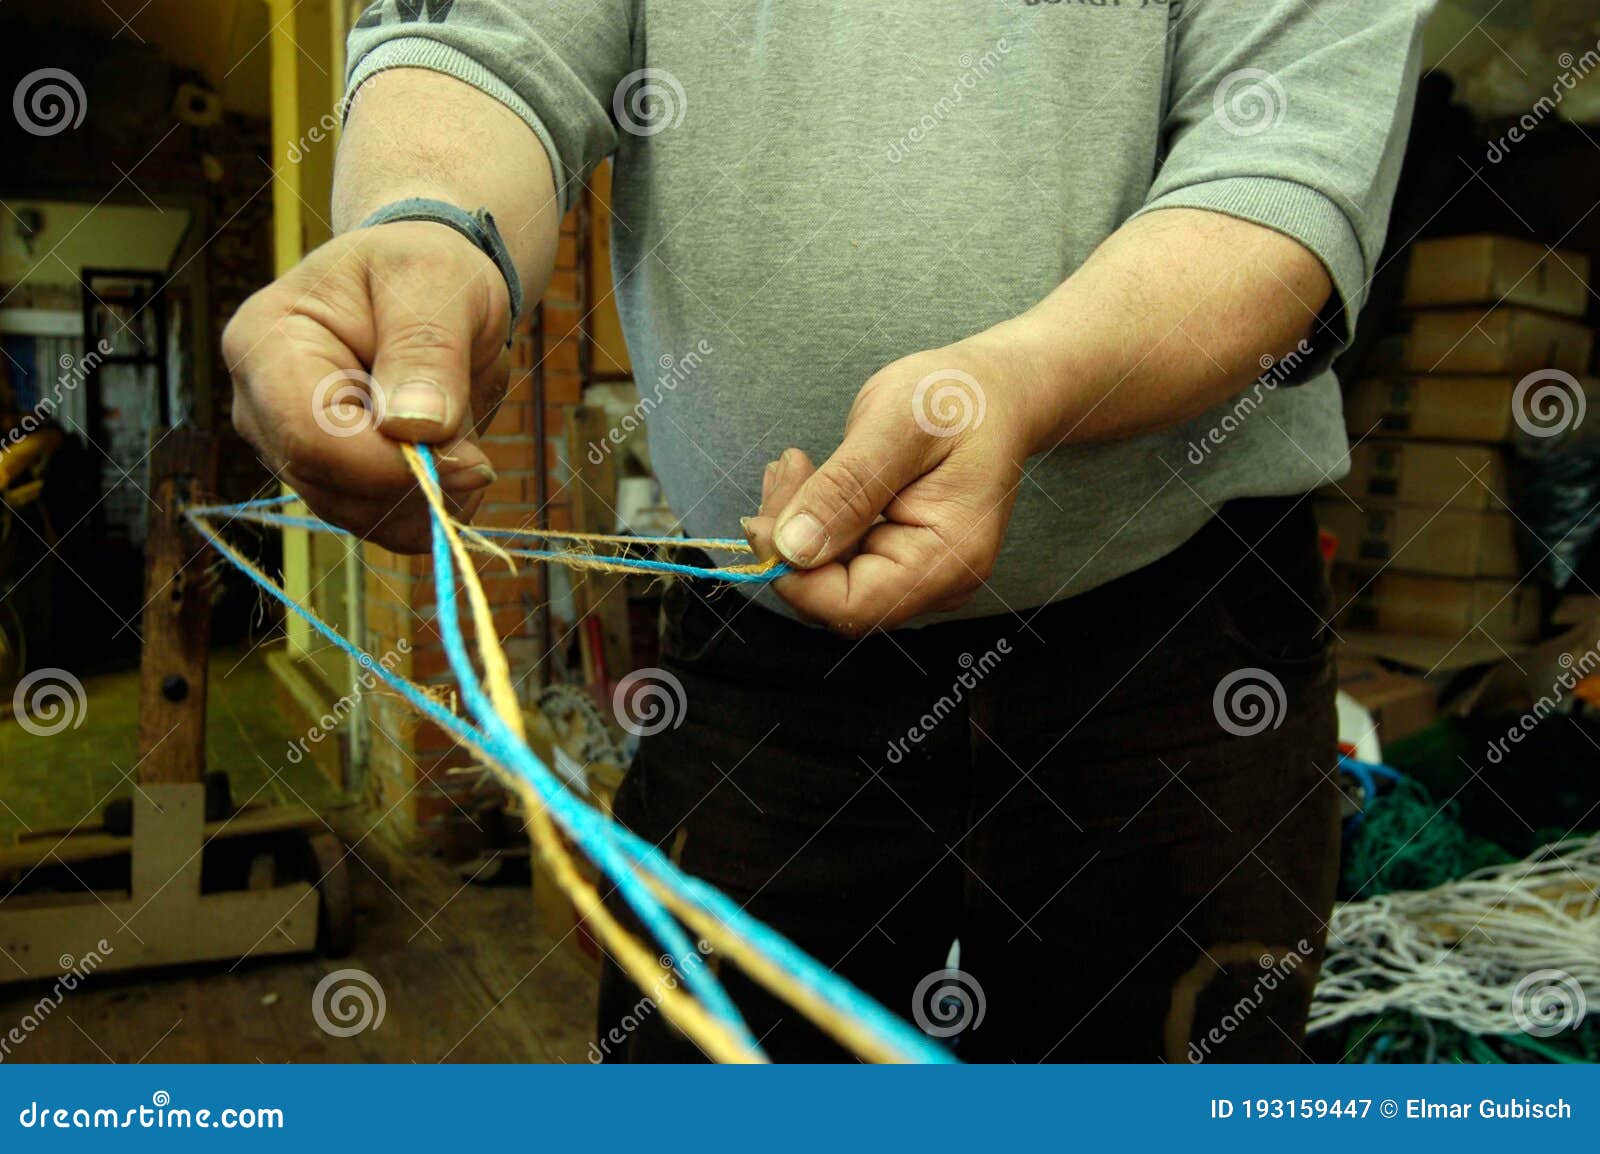 Manual Rope Making by Professional Rope Maker Stock Image - Image of cord,  economy: 193159447